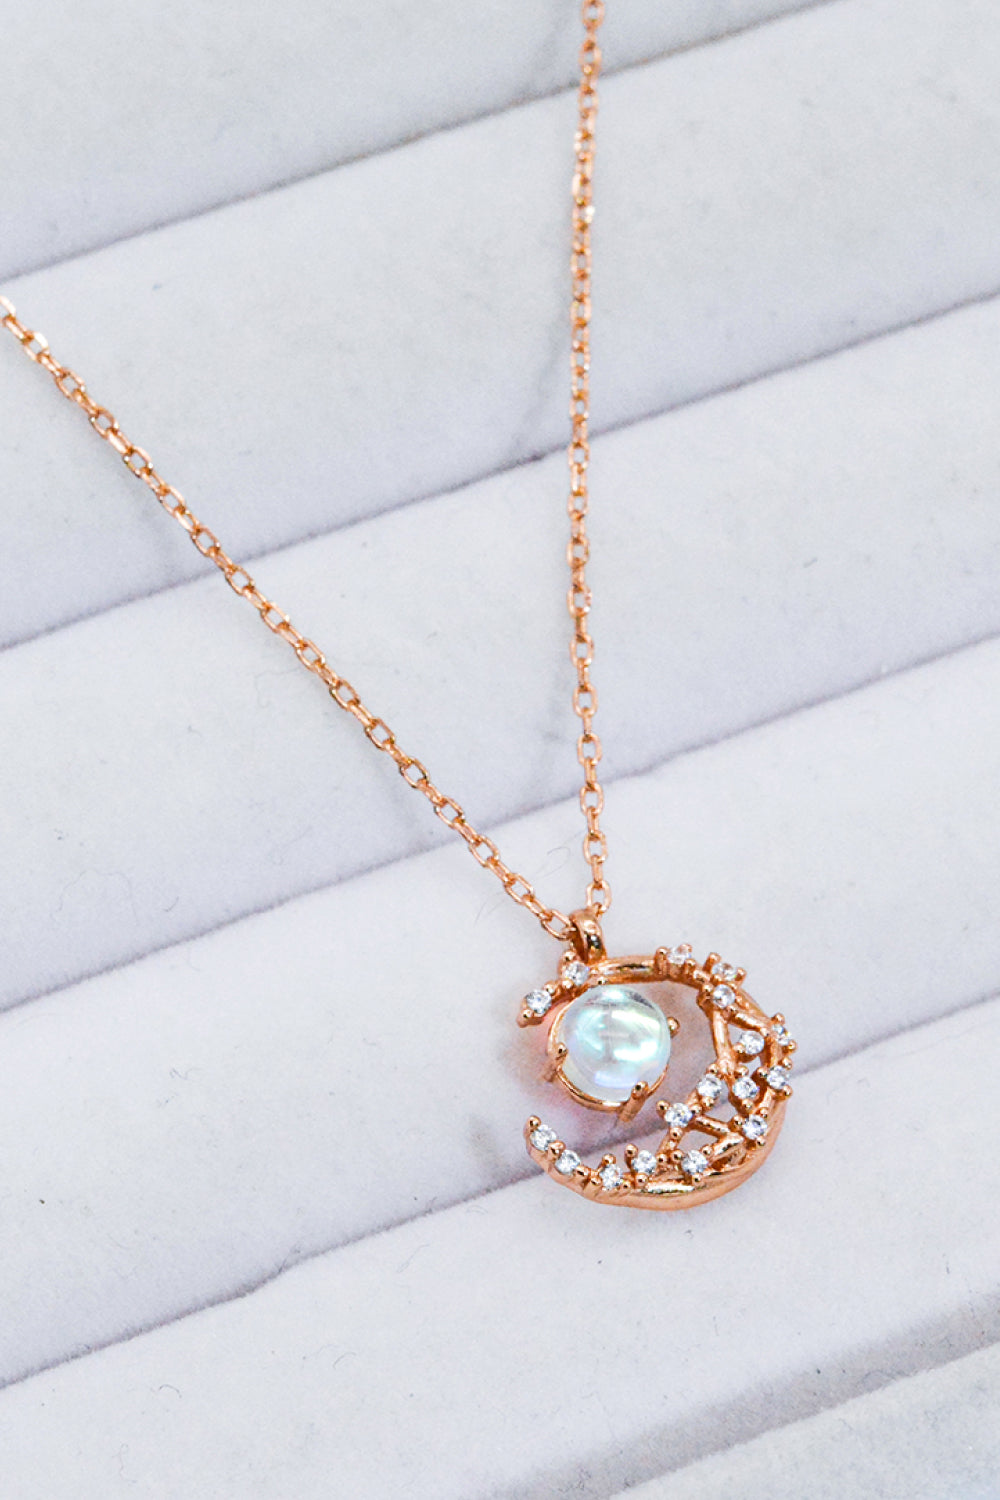 Where It All Began Moonstone Necklace king-general-store-5710.myshopify.com